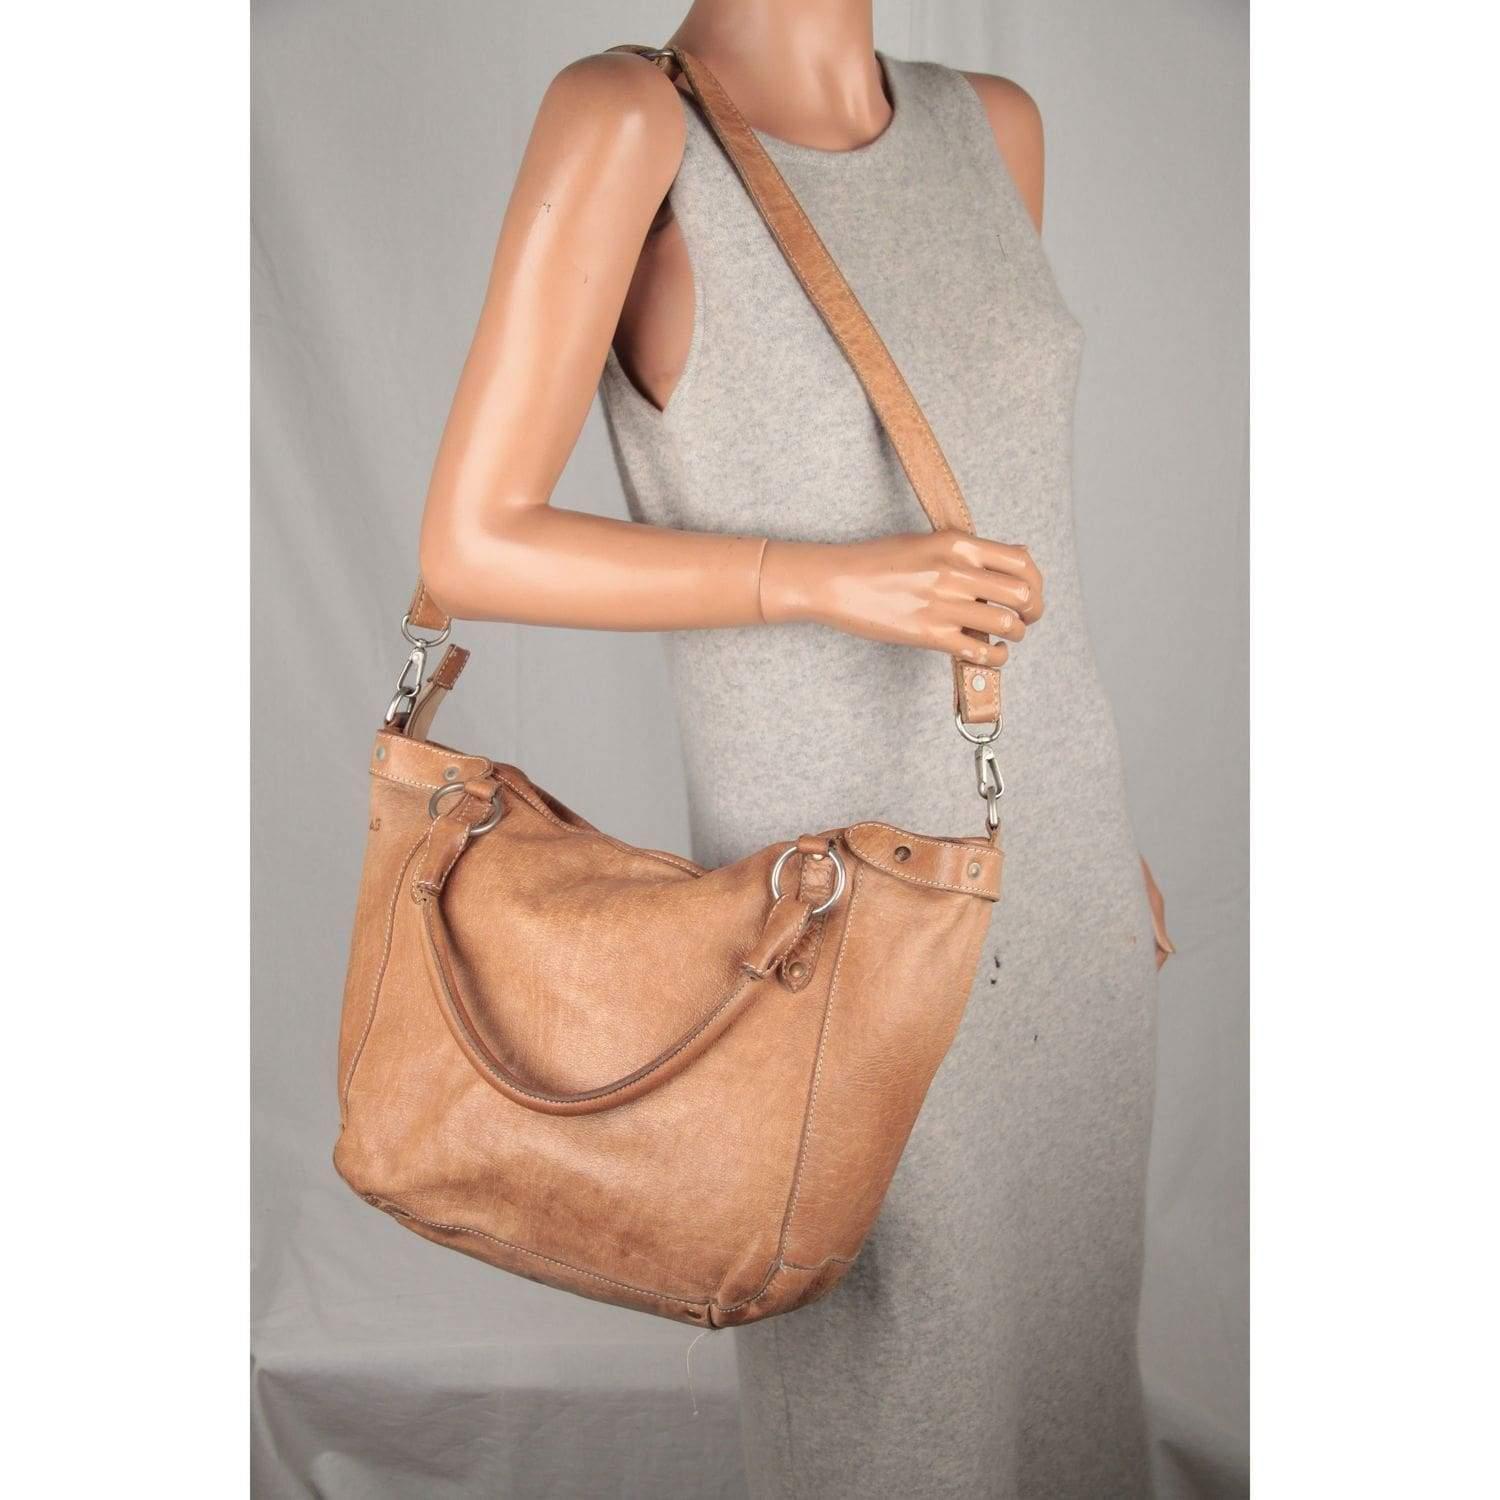 MATERIAL: Leather COLOR: Tan MODEL: GENDER: Womens SIZE: CONDITION RATING: B :GOOD CONDITION - Some light wear of use CONDITION DETAILS: Some scratches and creases on leather due to normal use, some darkness and pen marks MEASUREMENTS: BAG HEIGHT: